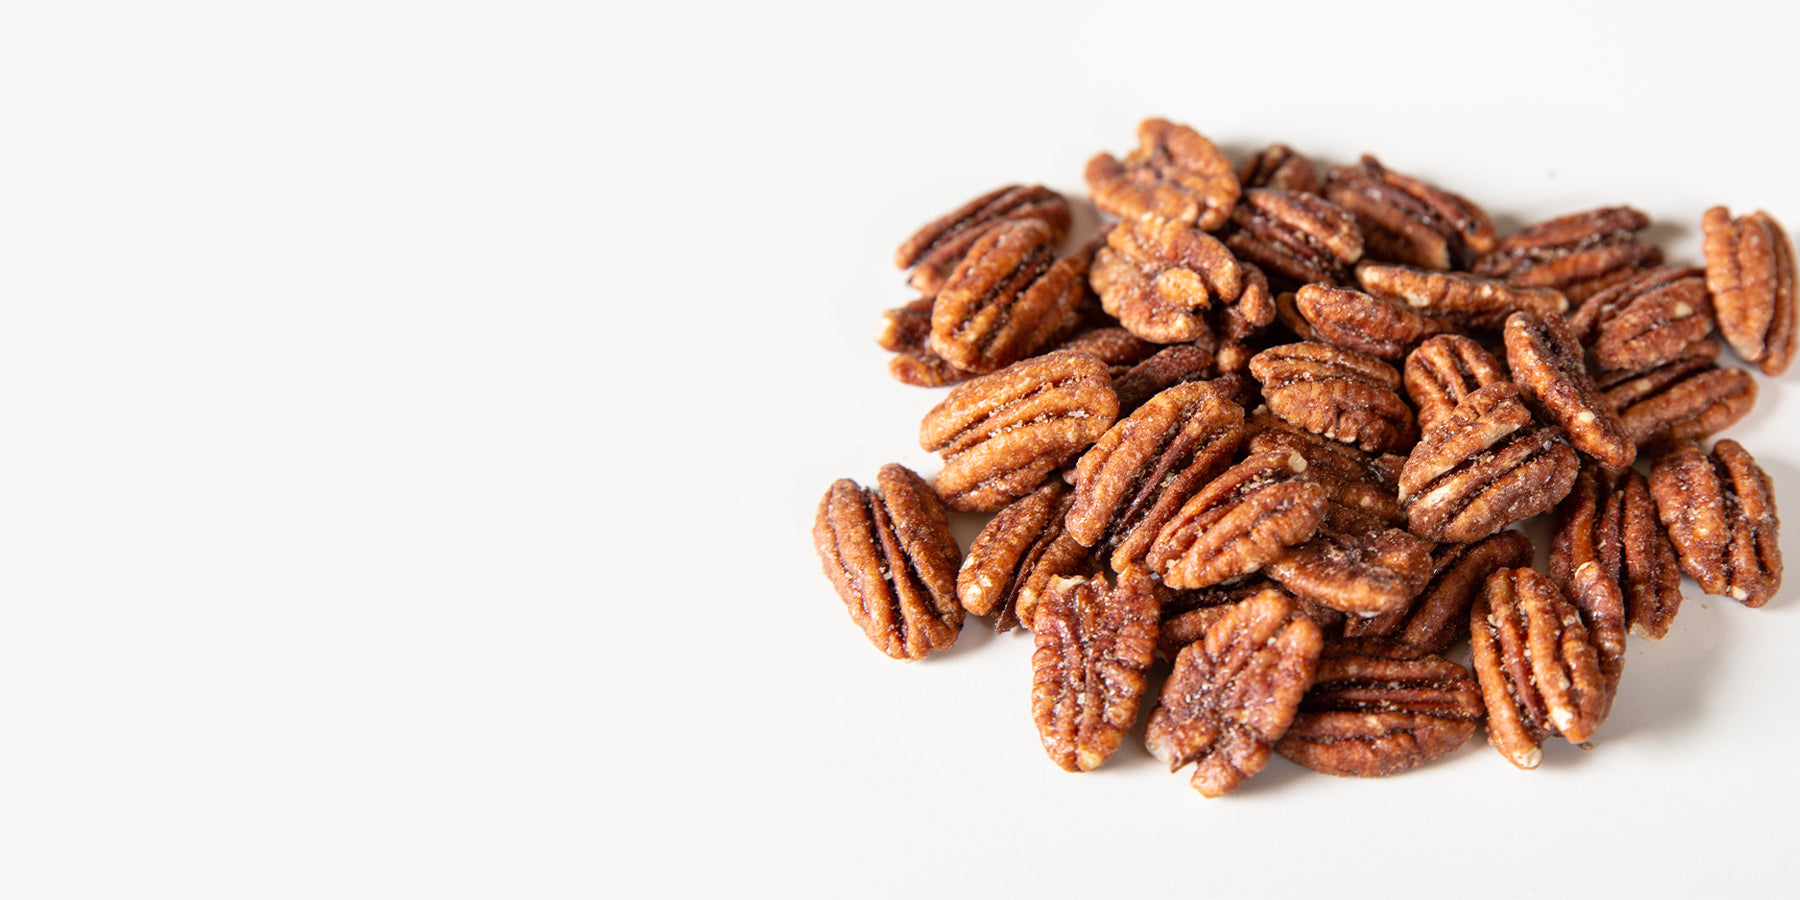 A pile of candied pecans on white background